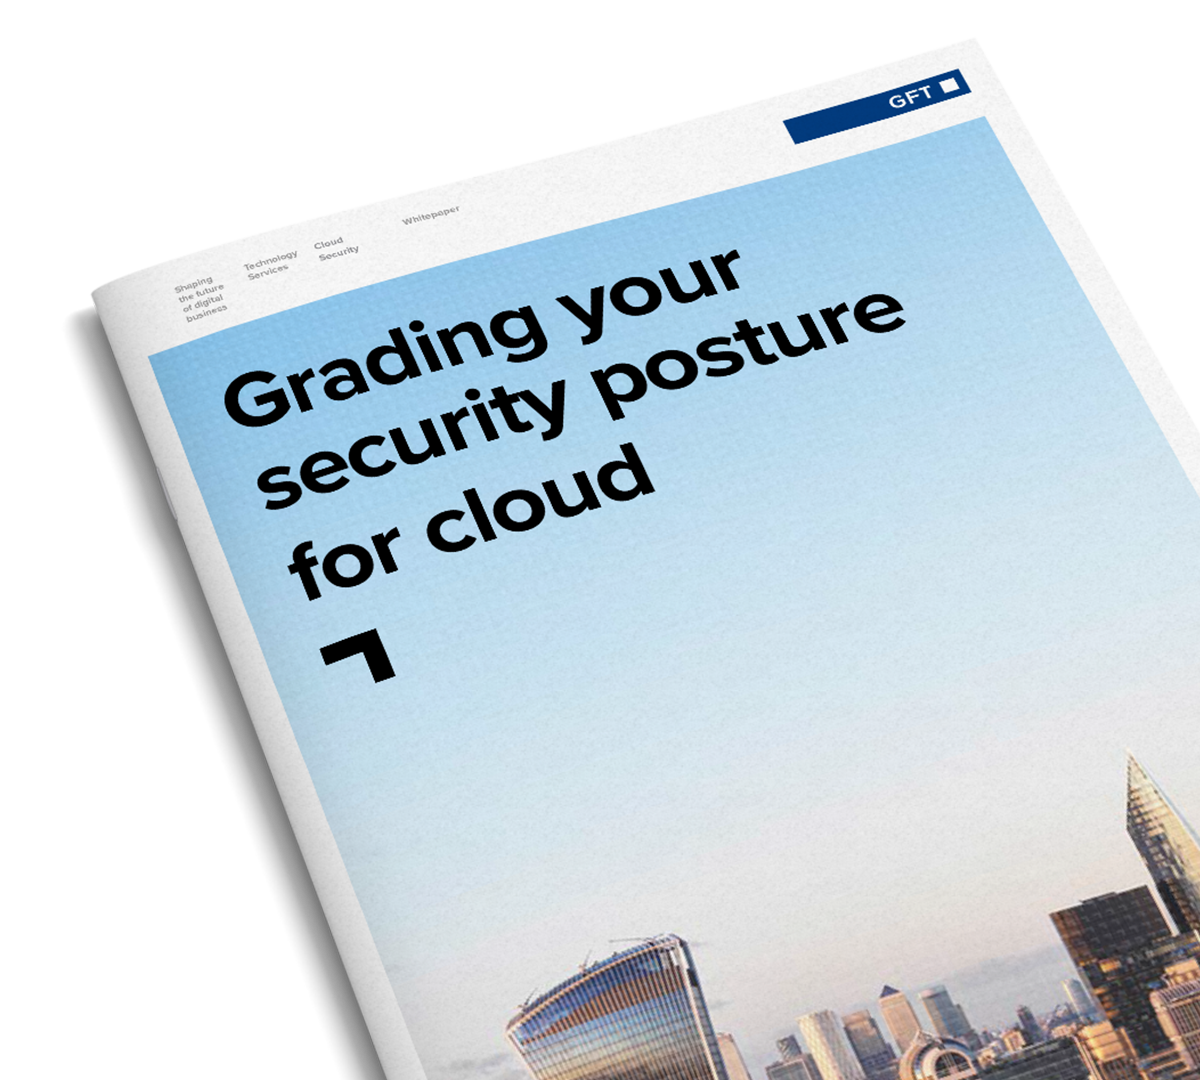 Discover how GFT clients make security part of their cloud strategy with a security posture assessment.